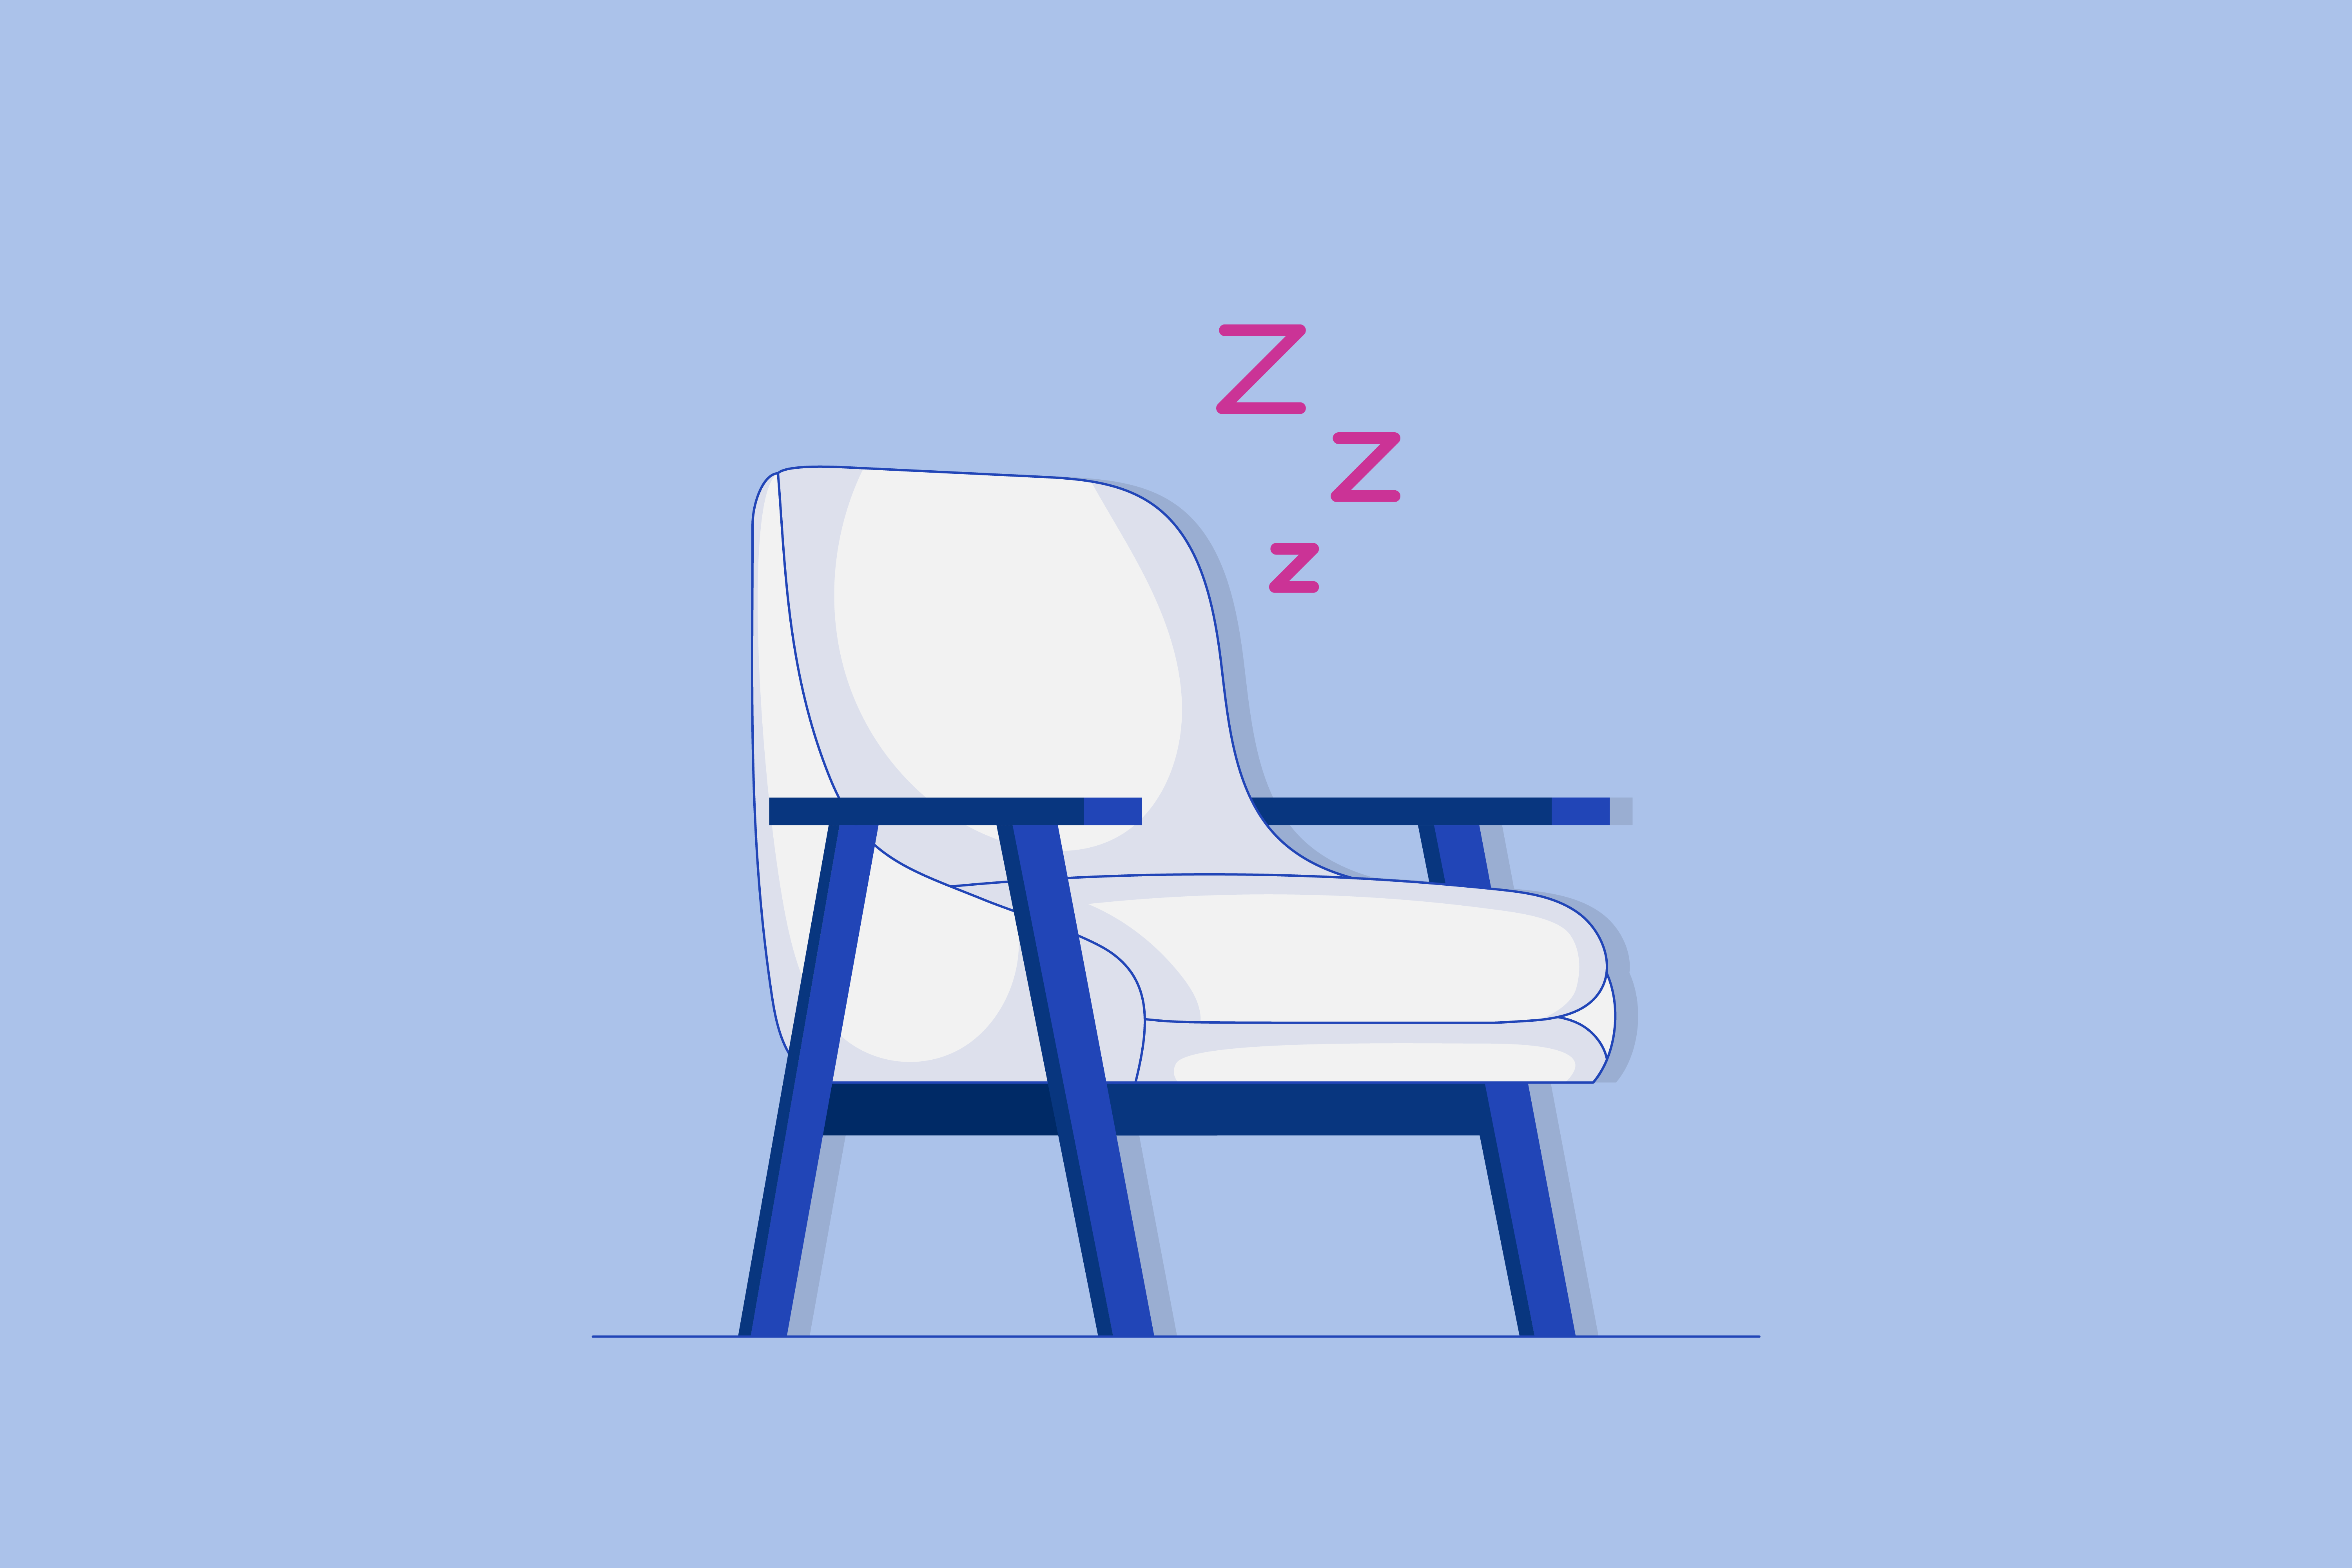 Sleeping Sitting Up: Is It Good or Bad for Your Health?